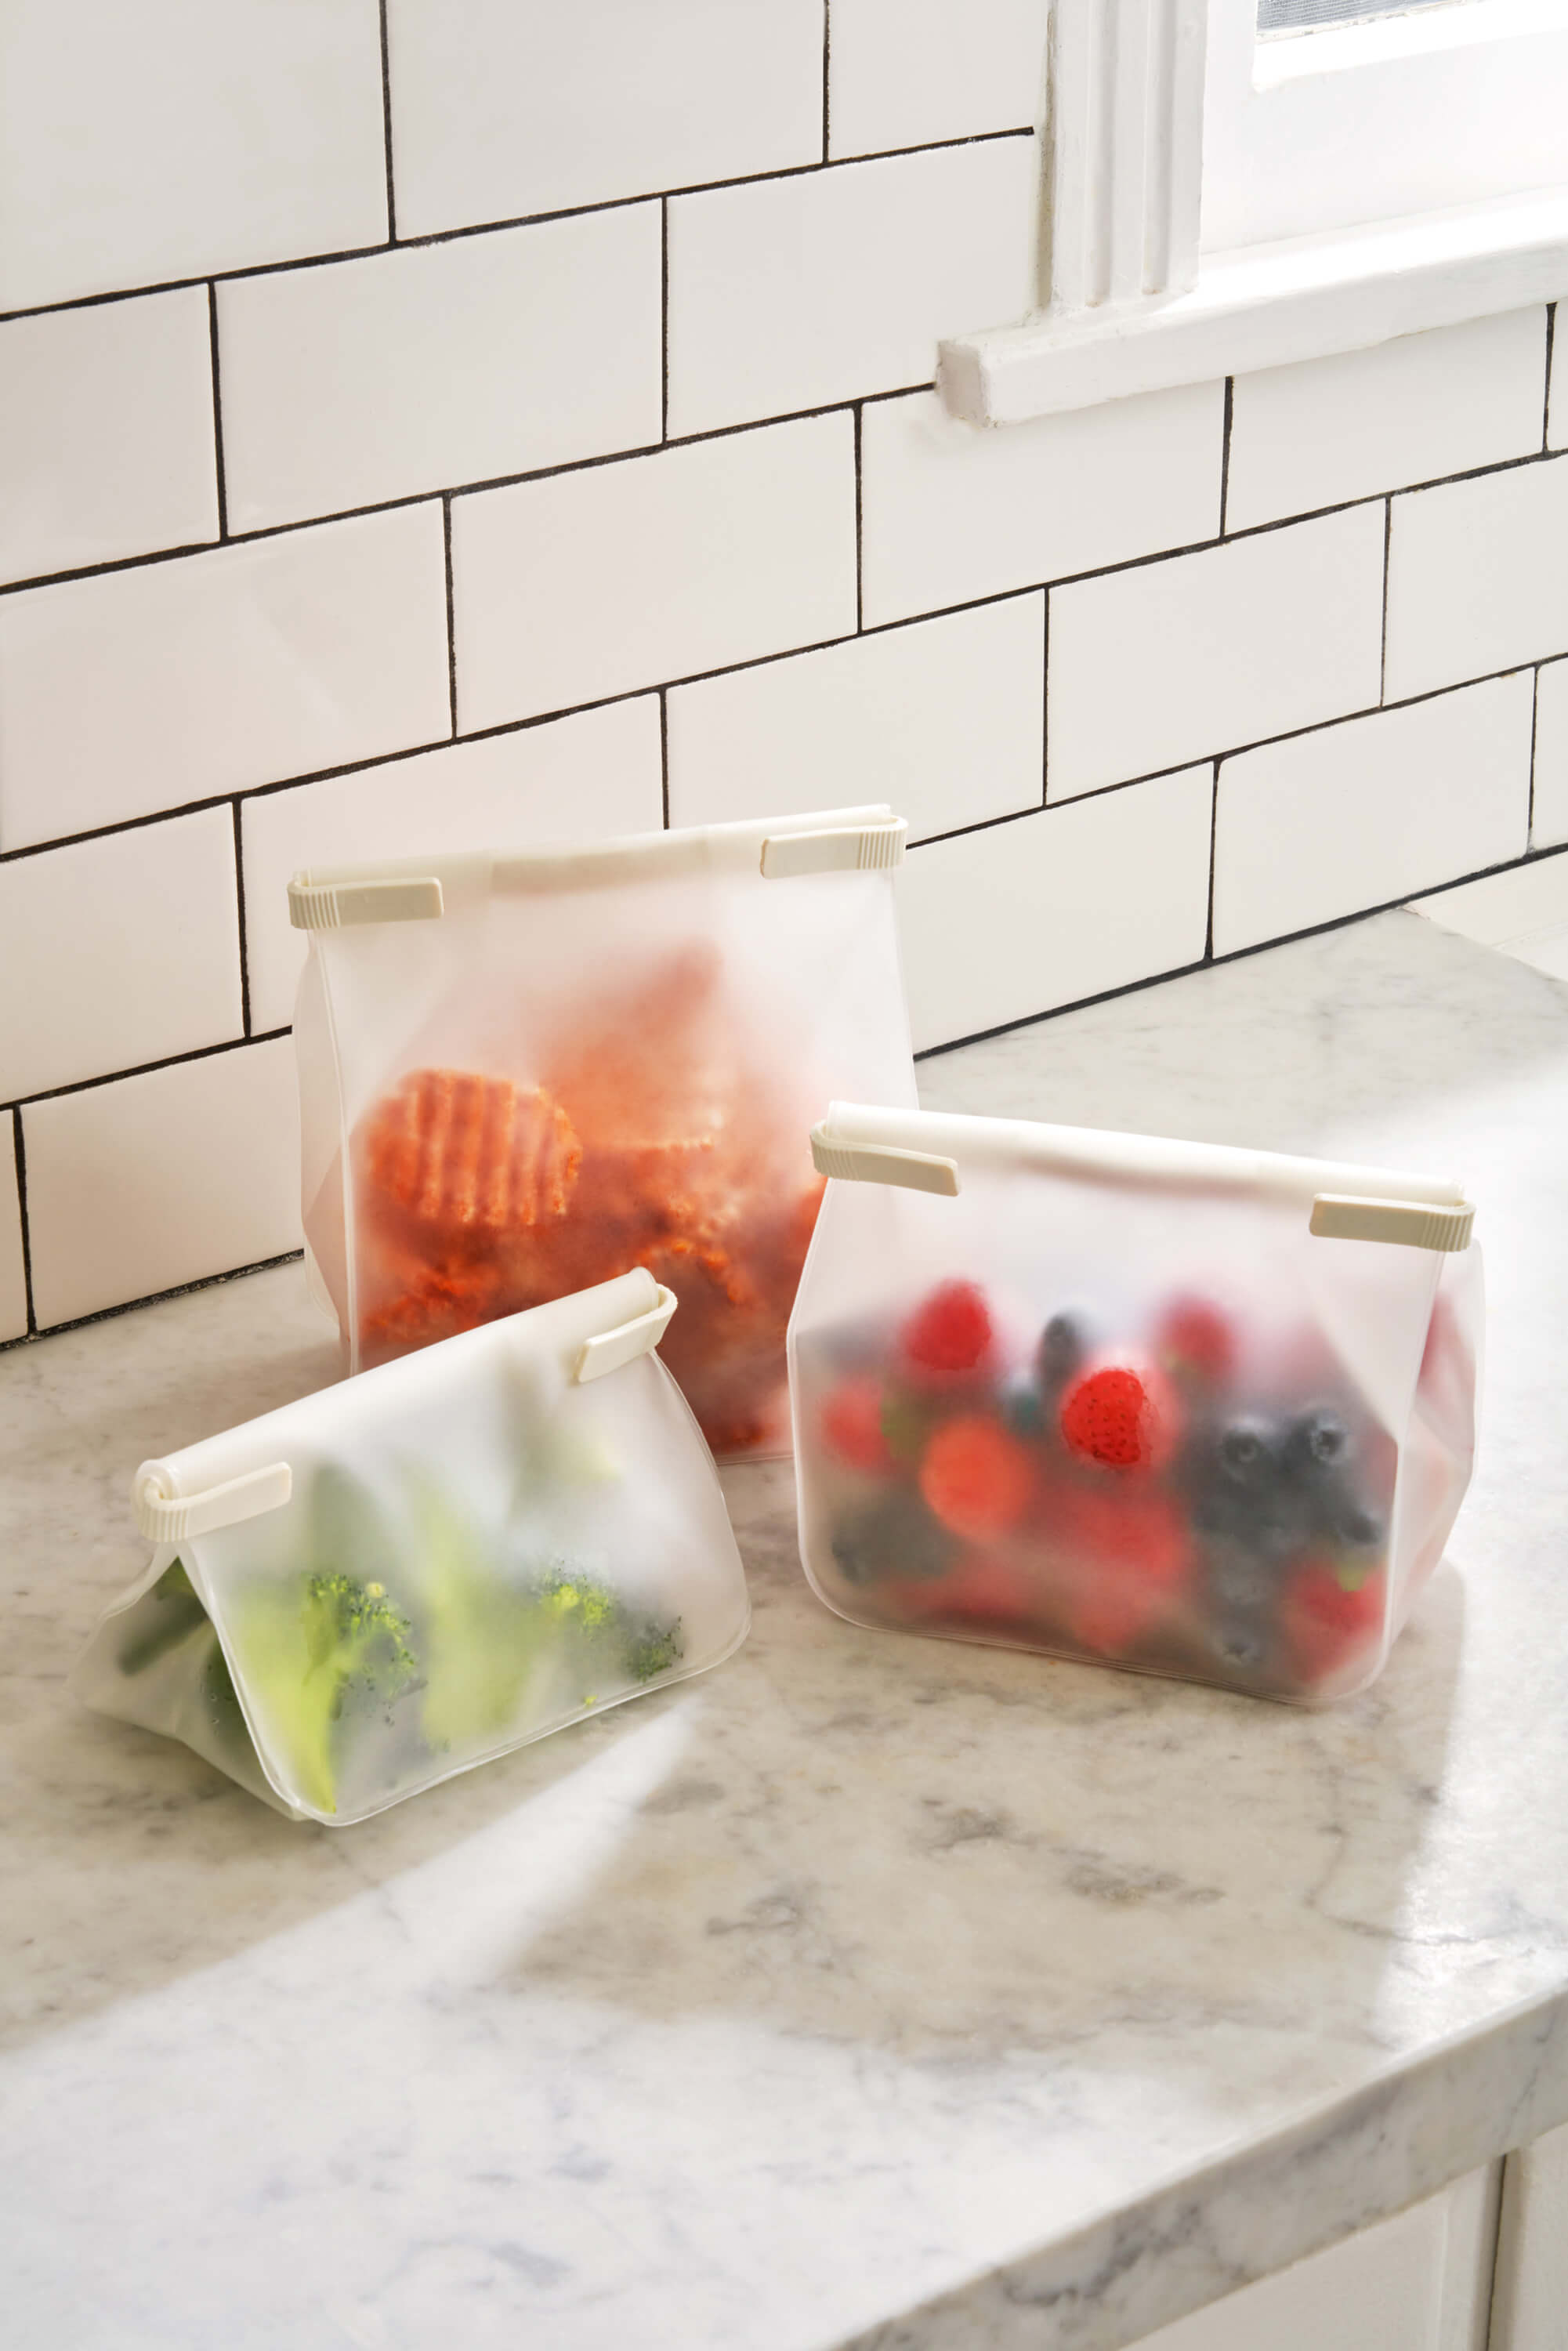 Silicone Reusable Food Storage Bags (Set of 6) (2 Large 50oz + 4